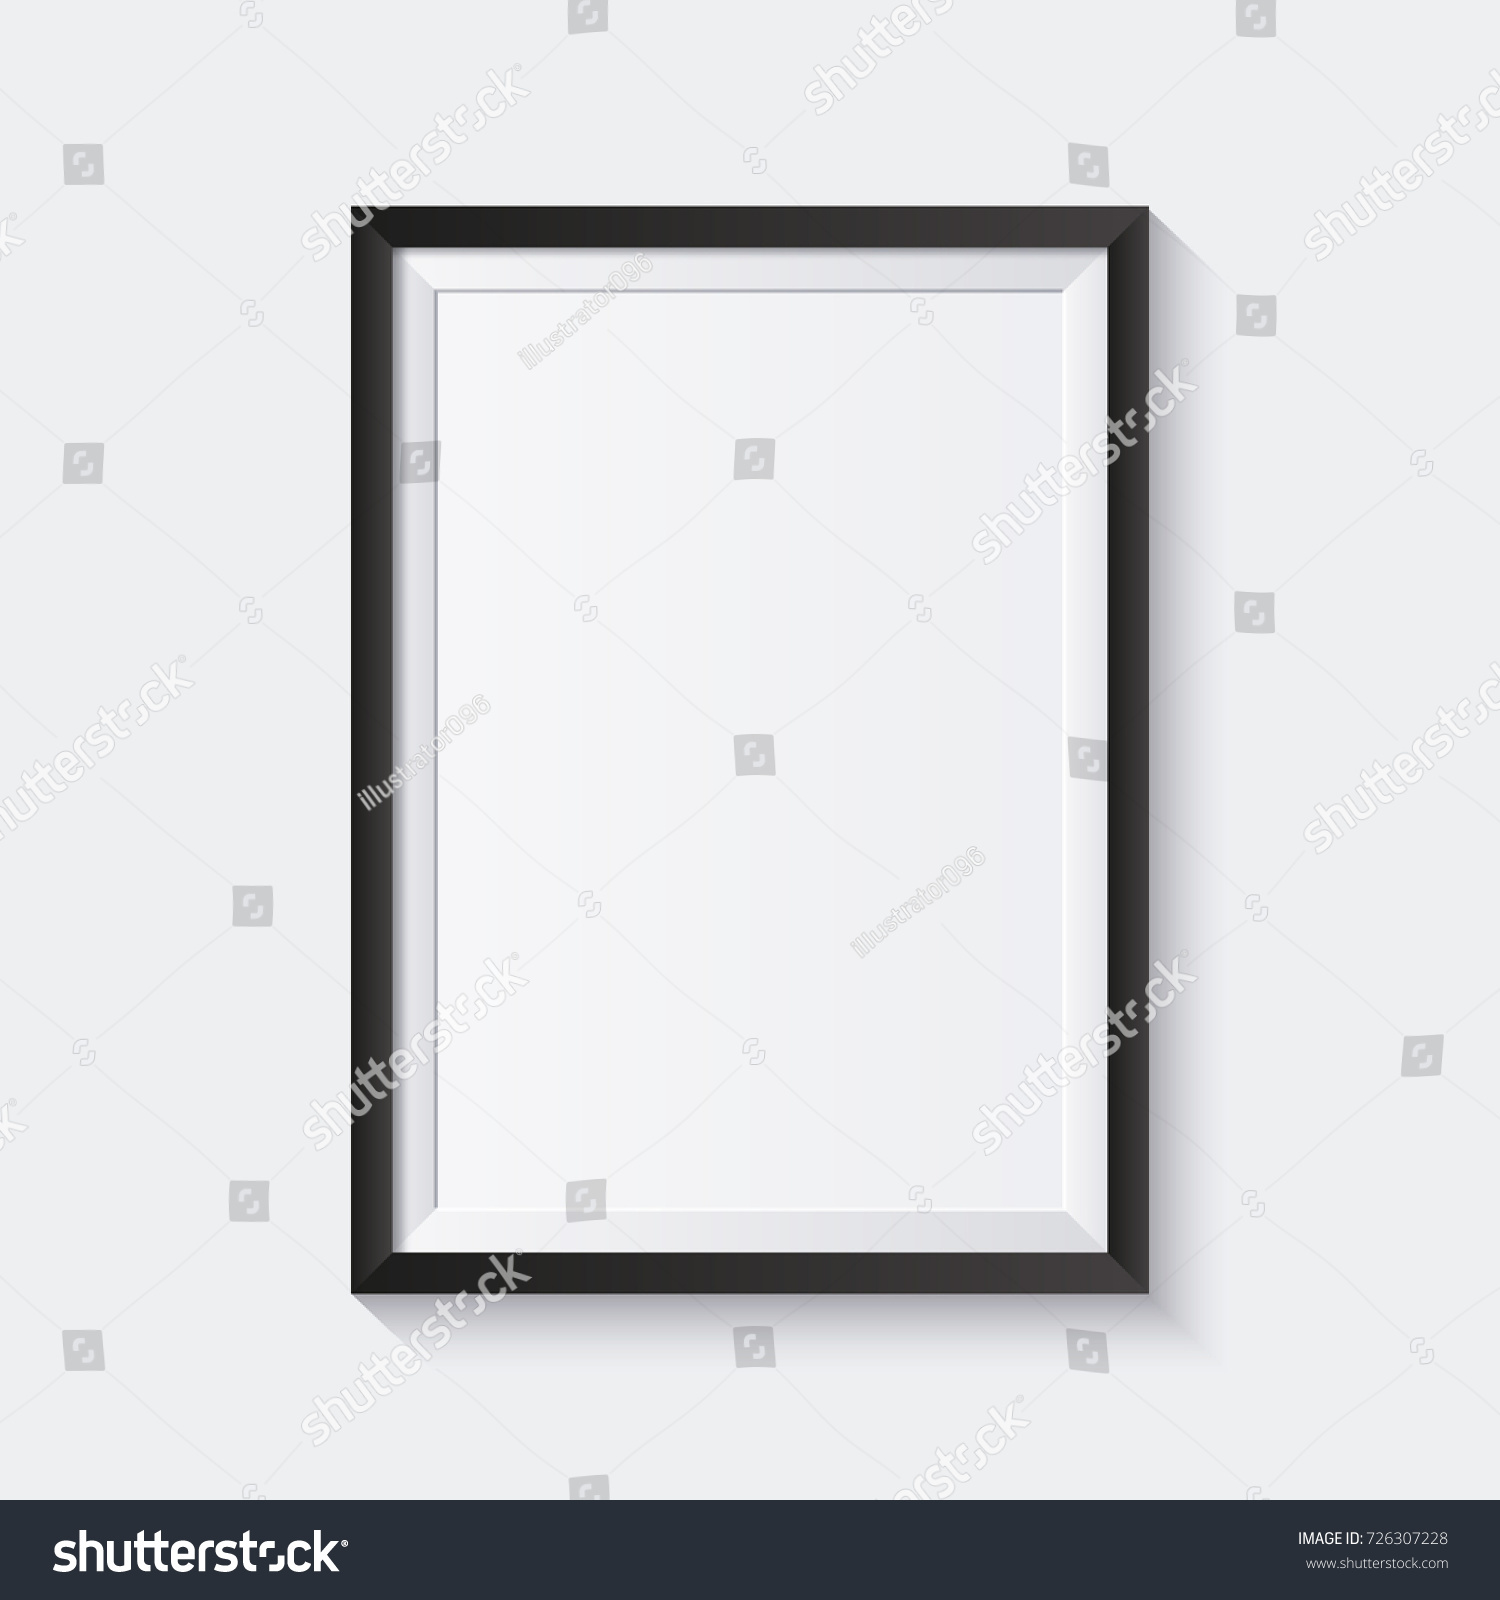 Realistic picture frame isolated on white background. Perfect for your presentations. Vector illustration. #726307228